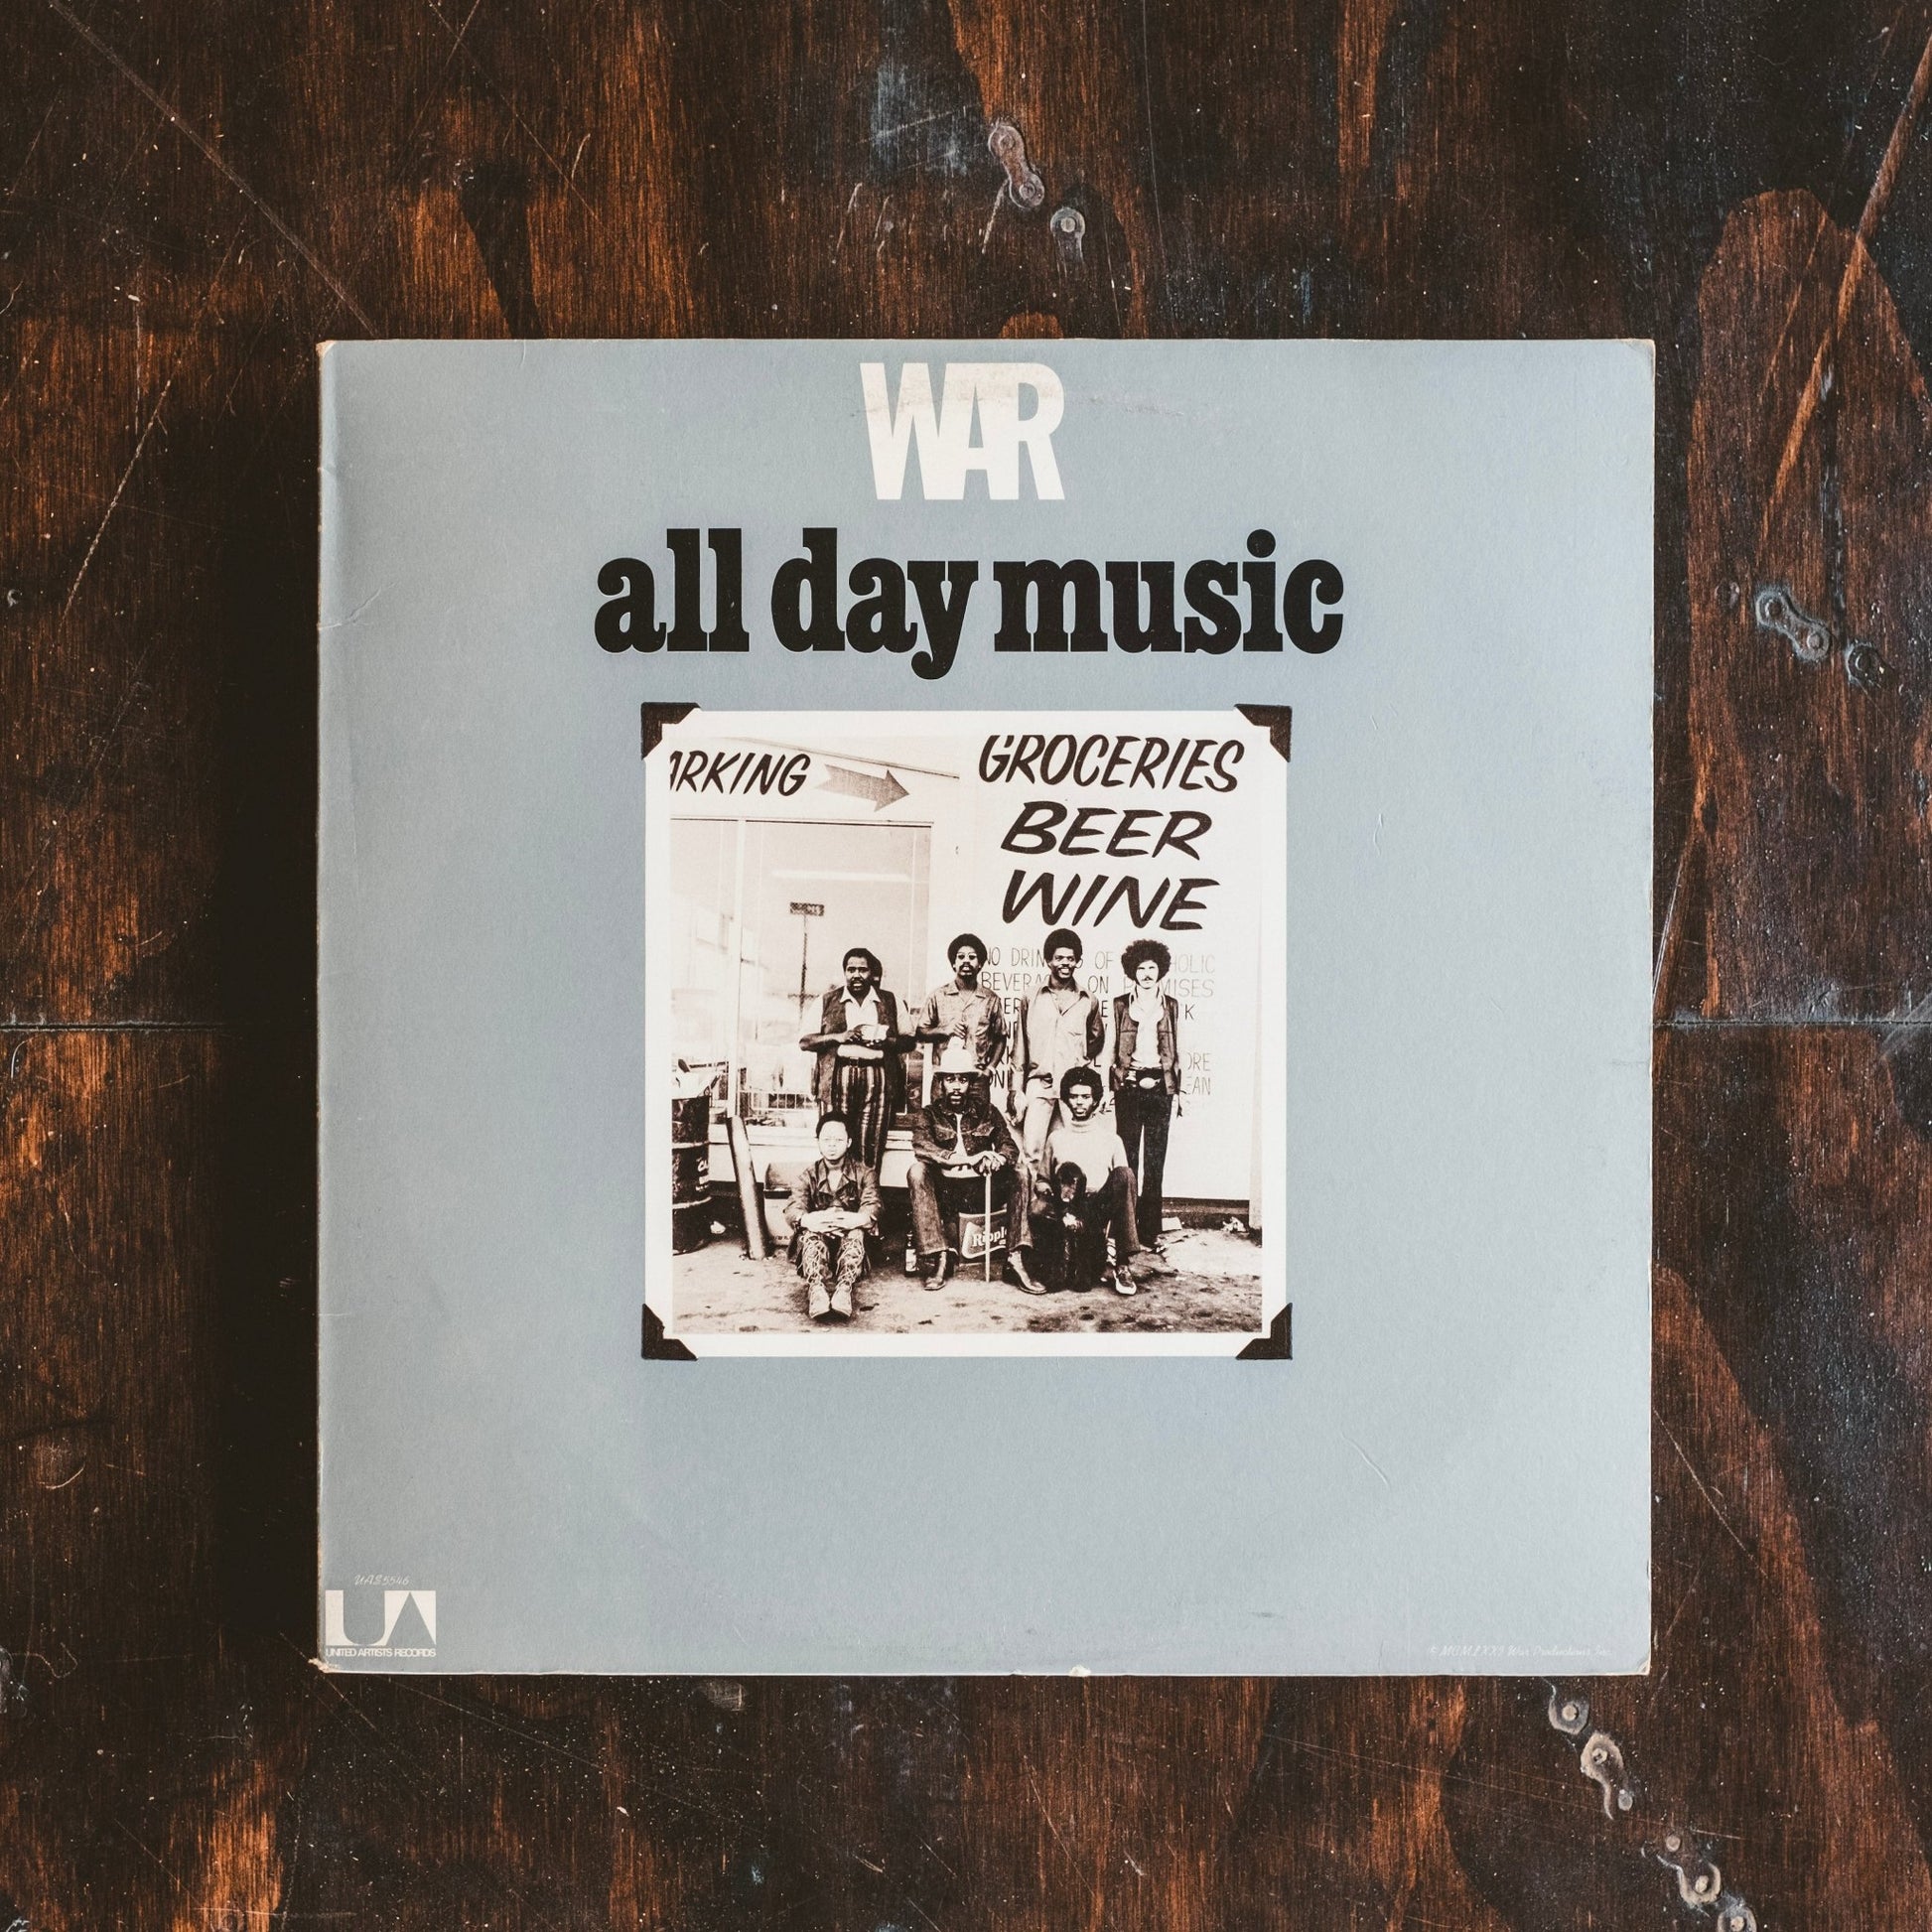 War - All Day Music (Pre-Loved) - VG+-War - All Day Music - LP's - Yellow Racket Records